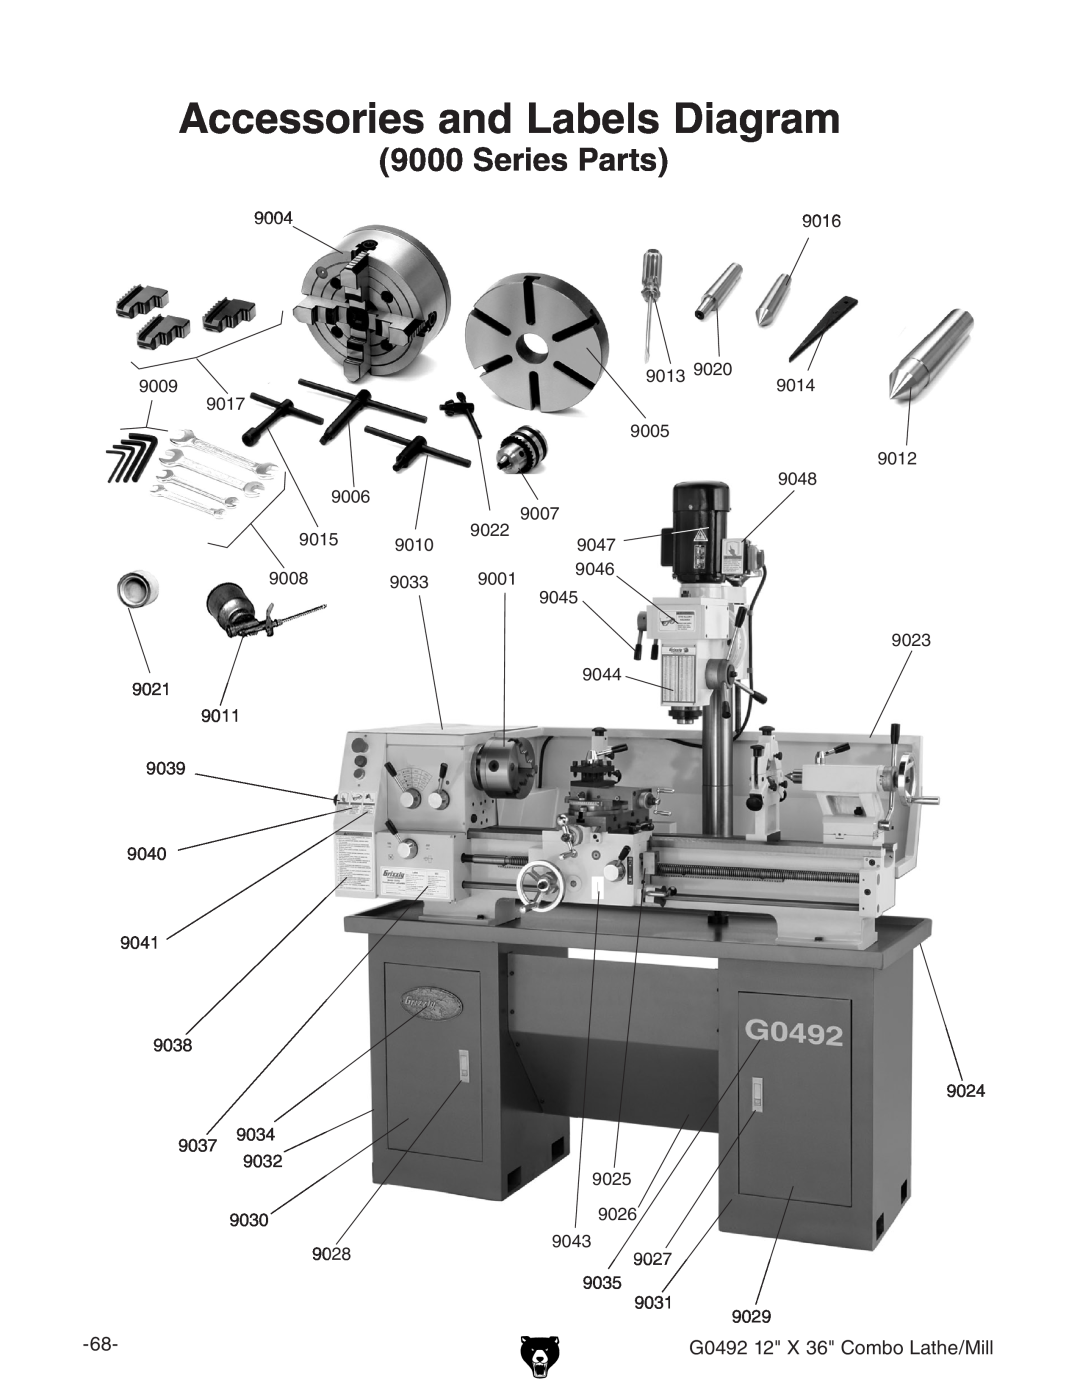 Grizzly G0492 owner manual Accessories and Labels Diagram, Series Parts 